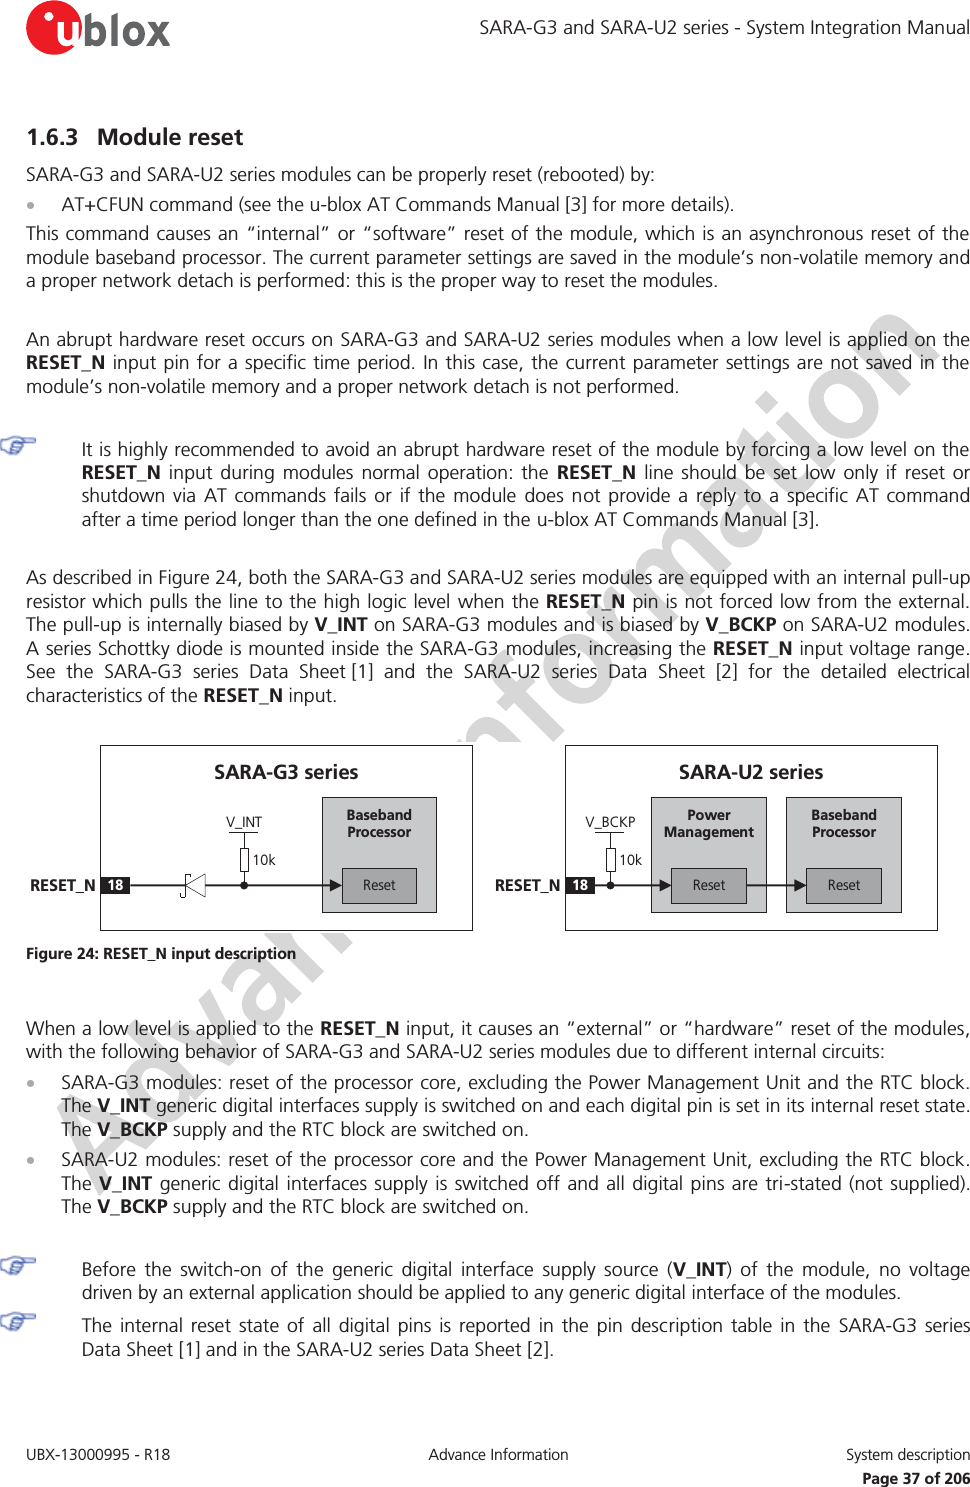 SARA-G3 and SARA-U2 series - System Integration Manual UBX-13000995 - R18  Advance Information  System description   Page 37 of 206 1.6.3 Module reset SARA-G3 and SARA-U2 series modules can be properly reset (rebooted) by: x AT+CFUN command (see the u-blox AT Commands Manual [3] for more details). This command causes an “internal” or “software” reset of the module, which is an asynchronous reset of the module baseband processor. The current parameter settings are saved in the module’s non-volatile memory and a proper network detach is performed: this is the proper way to reset the modules.  An abrupt hardware reset occurs on SARA-G3 and SARA-U2 series modules when a low level is applied on the RESET_N input pin for a specific time period. In this case, the current parameter settings are not saved in the module’s non-volatile memory and a proper network detach is not performed.   It is highly recommended to avoid an abrupt hardware reset of the module by forcing a low level on the RESET_N input during modules normal operation: the RESET_N line should be set low only if reset or shutdown via AT commands fails or if the module does not provide a reply to a specific AT command after a time period longer than the one defined in the u-blox AT Commands Manual [3].  As described in Figure 24, both the SARA-G3 and SARA-U2 series modules are equipped with an internal pull-up resistor which pulls the line to the high logic level when the RESET_N pin is not forced low from the external. The pull-up is internally biased by V_INT on SARA-G3 modules and is biased by V_BCKP on SARA-U2 modules. A series Schottky diode is mounted inside the SARA-G3 modules, increasing the RESET_N input voltage range. See the SARA-G3 series Data Sheet [1]  and  the  SARA-U2 series Data Sheet [2] for the detailed electrical characteristics of the RESET_N input.  Baseband Processor18RESET_NSARA-U2 seriesResetPower ManagementReset10kV_BCKPBaseband Processor18RESET_NSARA-G3 seriesReset10kV_INT Figure 24: RESET_N input description  When a low level is applied to the RESET_N input, it causes an “external” or “hardware” reset of the modules, with the following behavior of SARA-G3 and SARA-U2 series modules due to different internal circuits: x SARA-G3 modules: reset of the processor core, excluding the Power Management Unit and the RTC block. The V_INT generic digital interfaces supply is switched on and each digital pin is set in its internal reset state. The V_BCKP supply and the RTC block are switched on. x SARA-U2 modules: reset of the processor core and the Power Management Unit, excluding the RTC block. The V_INT generic digital interfaces supply is switched off and all digital pins are tri-stated (not supplied). The V_BCKP supply and the RTC block are switched on.   Before the switch-on of the generic digital interface supply source (V_INT) of the module, no voltage driven by an external application should be applied to any generic digital interface of the modules. The internal reset state of all digital pins is reported in the pin description table in the SARA-G3 series Data Sheet [1] and in the SARA-U2 series Data Sheet [2]. 